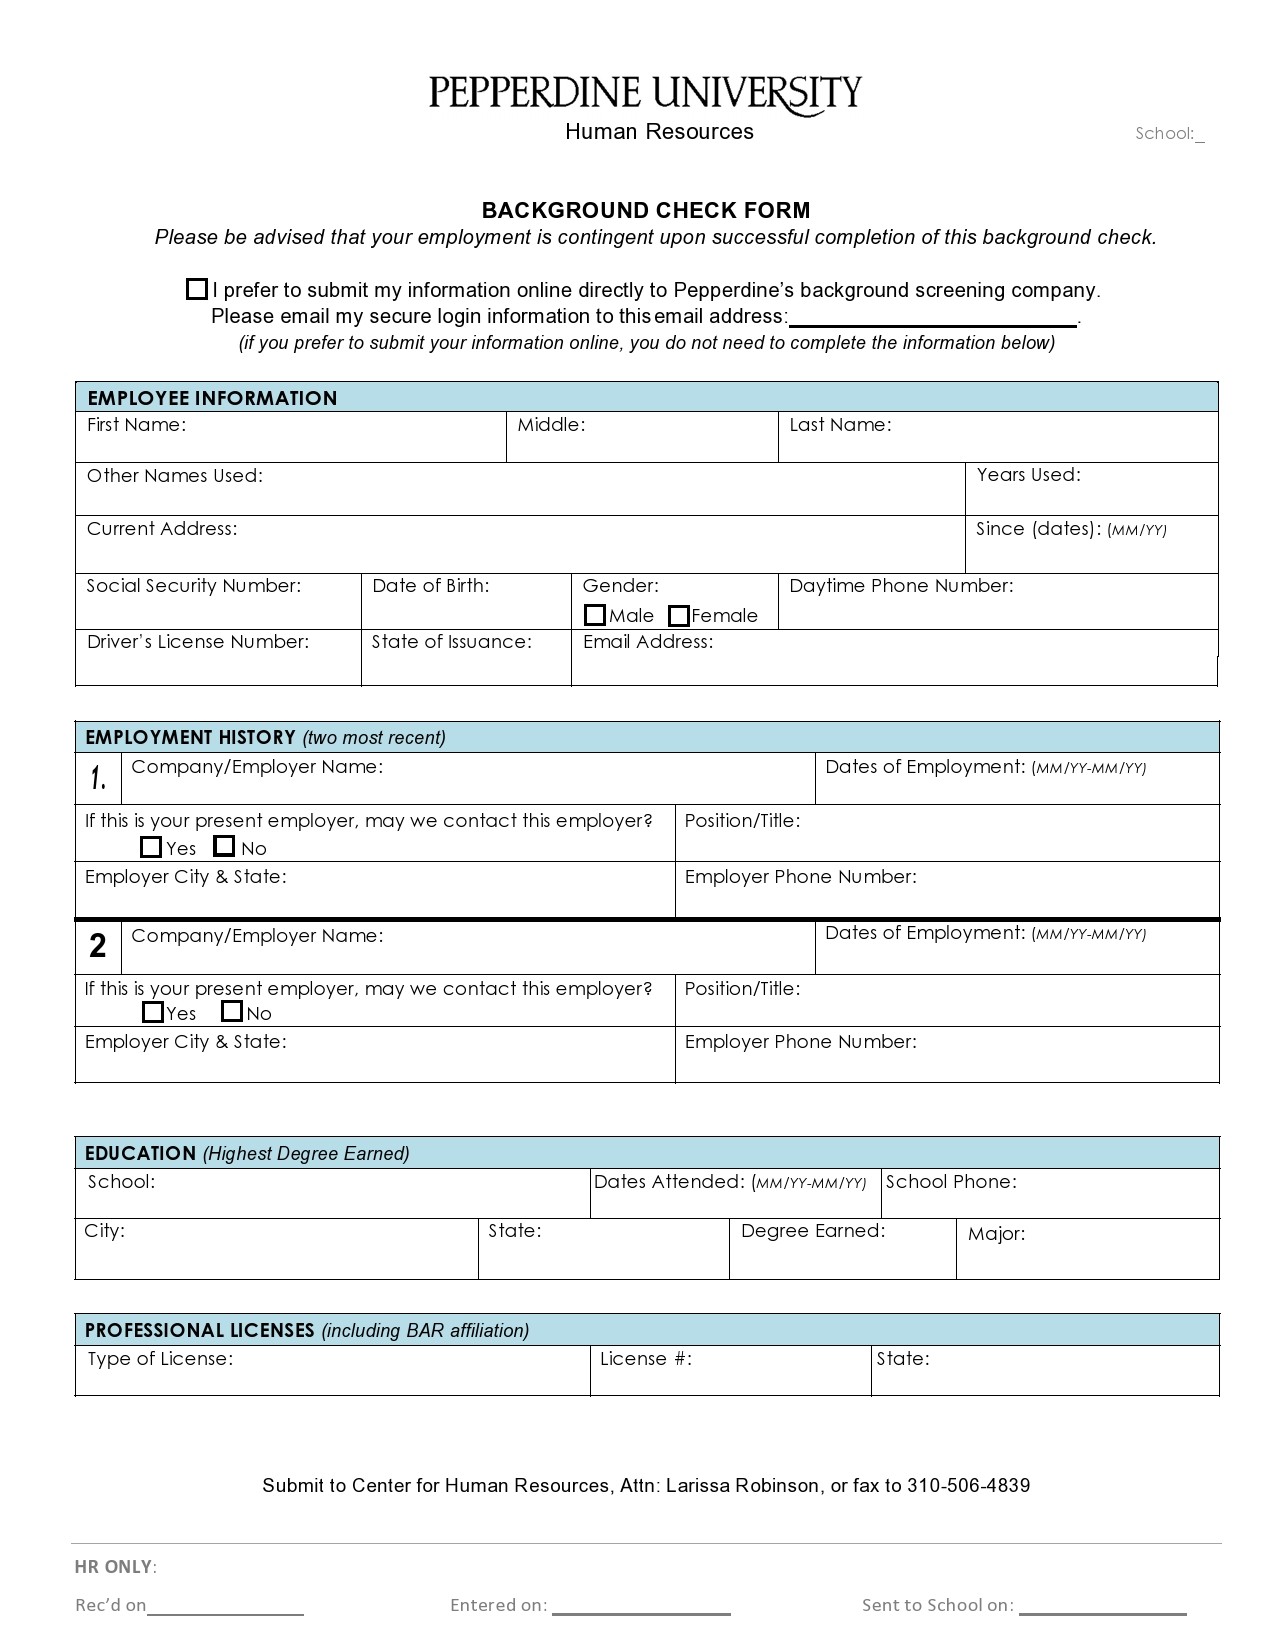 Free background check form 25